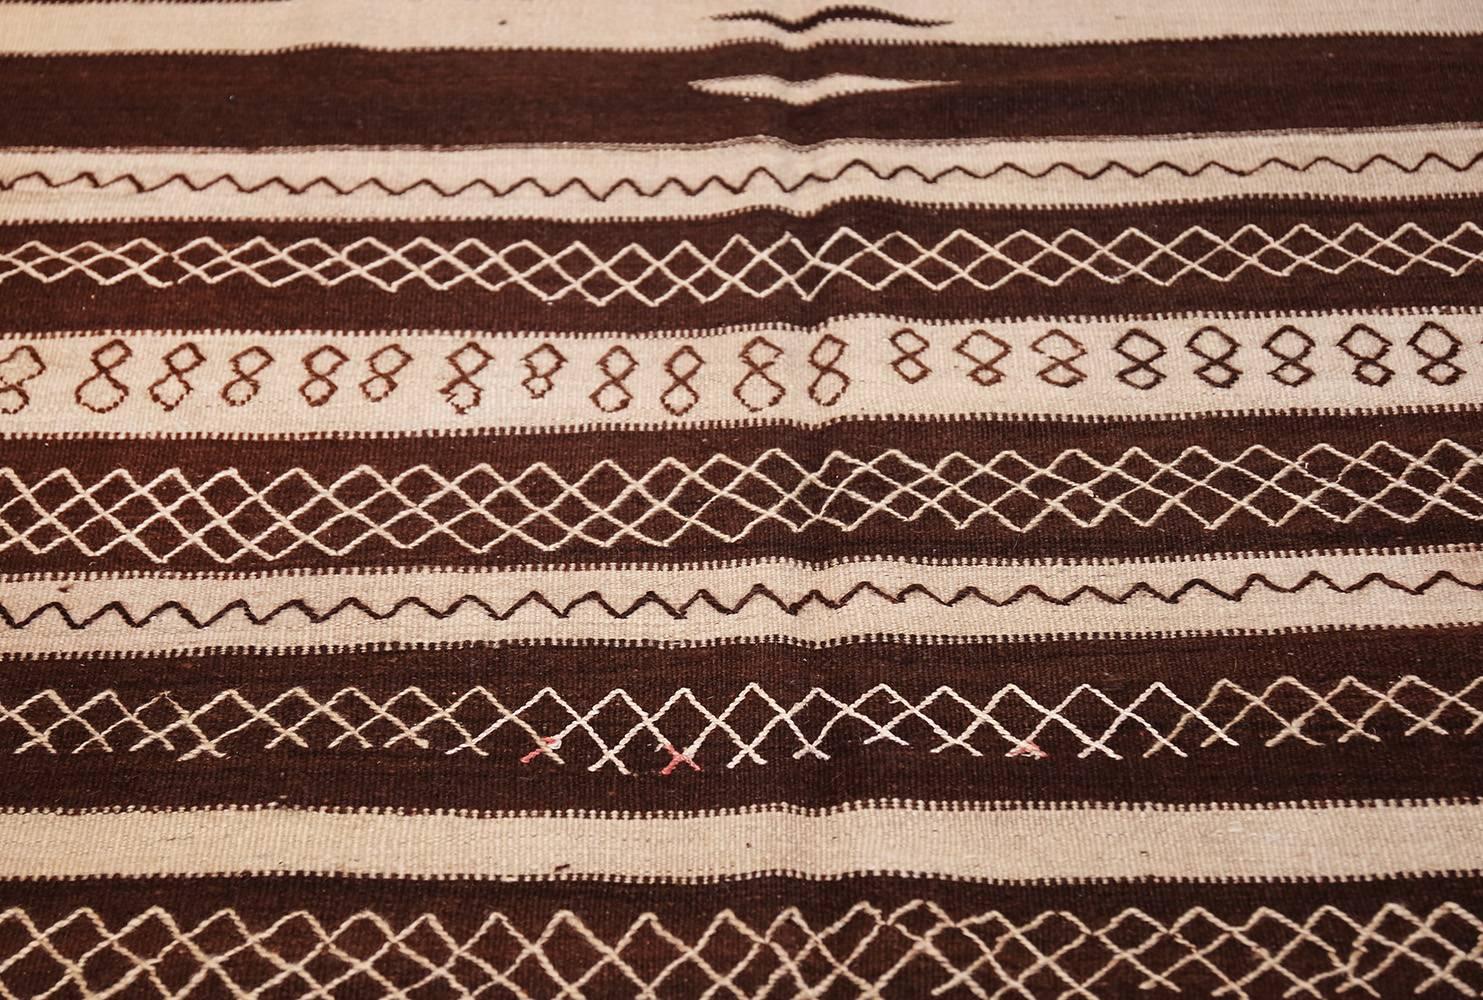 Drawn in a bold, graphic style, this vintage Moroccan Kilim depicts a strong pattern of walnut brown and ivory stripes that is embellished with tiny latticework fences, almond-shaped windows and comb motifs with extended fingers. This foundation of